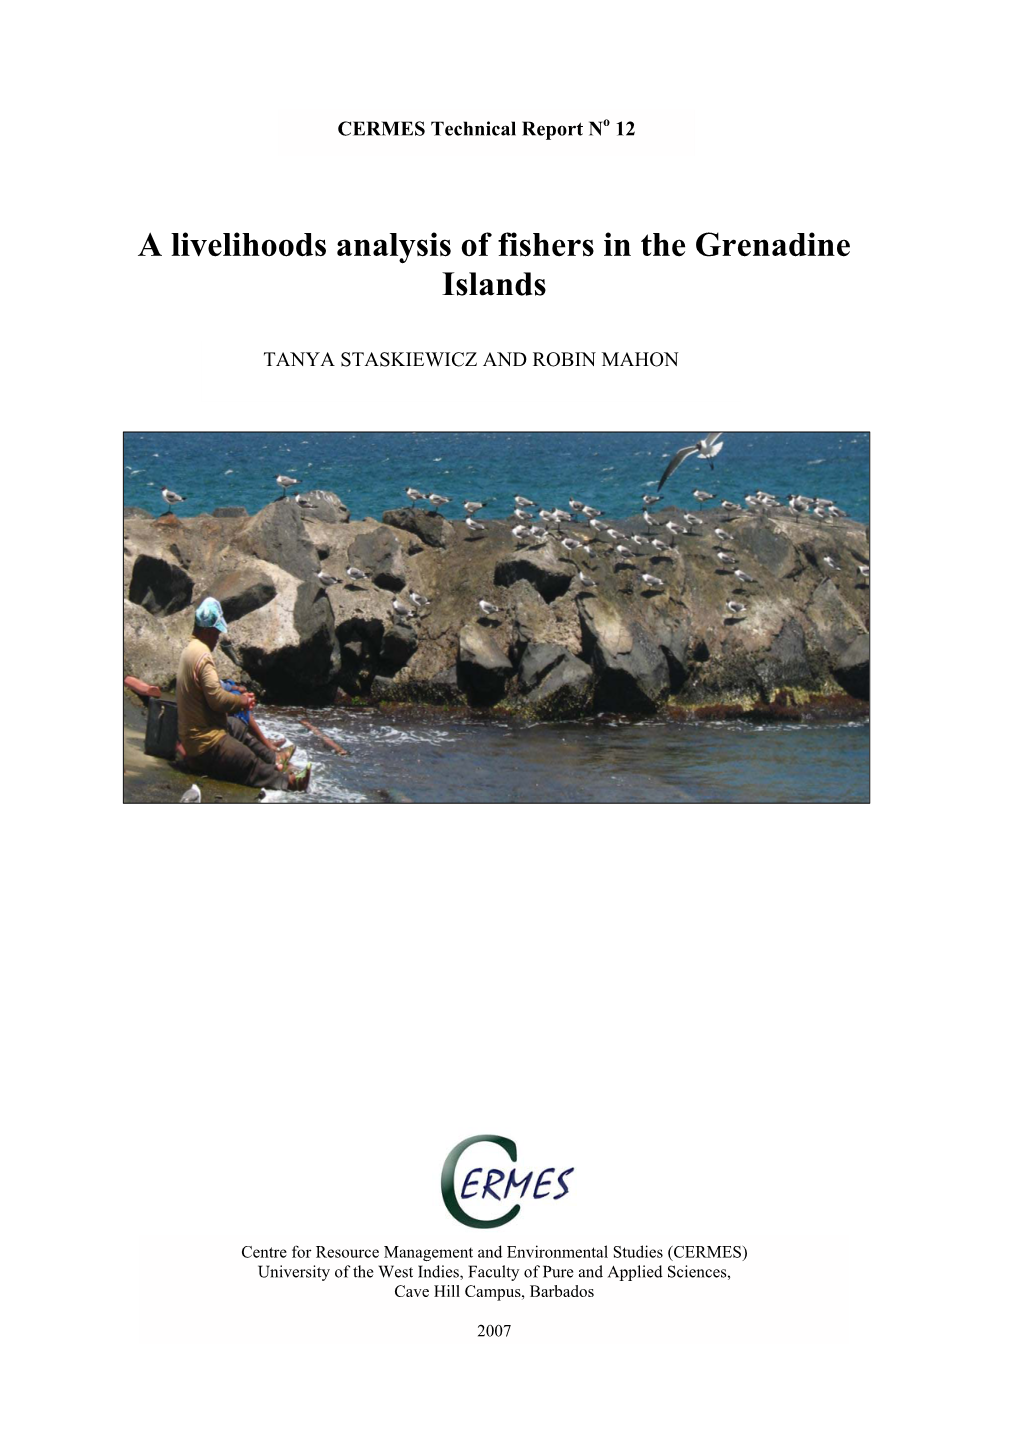 A Livelihoods Analysis of Fishers in the Grenadine Islands